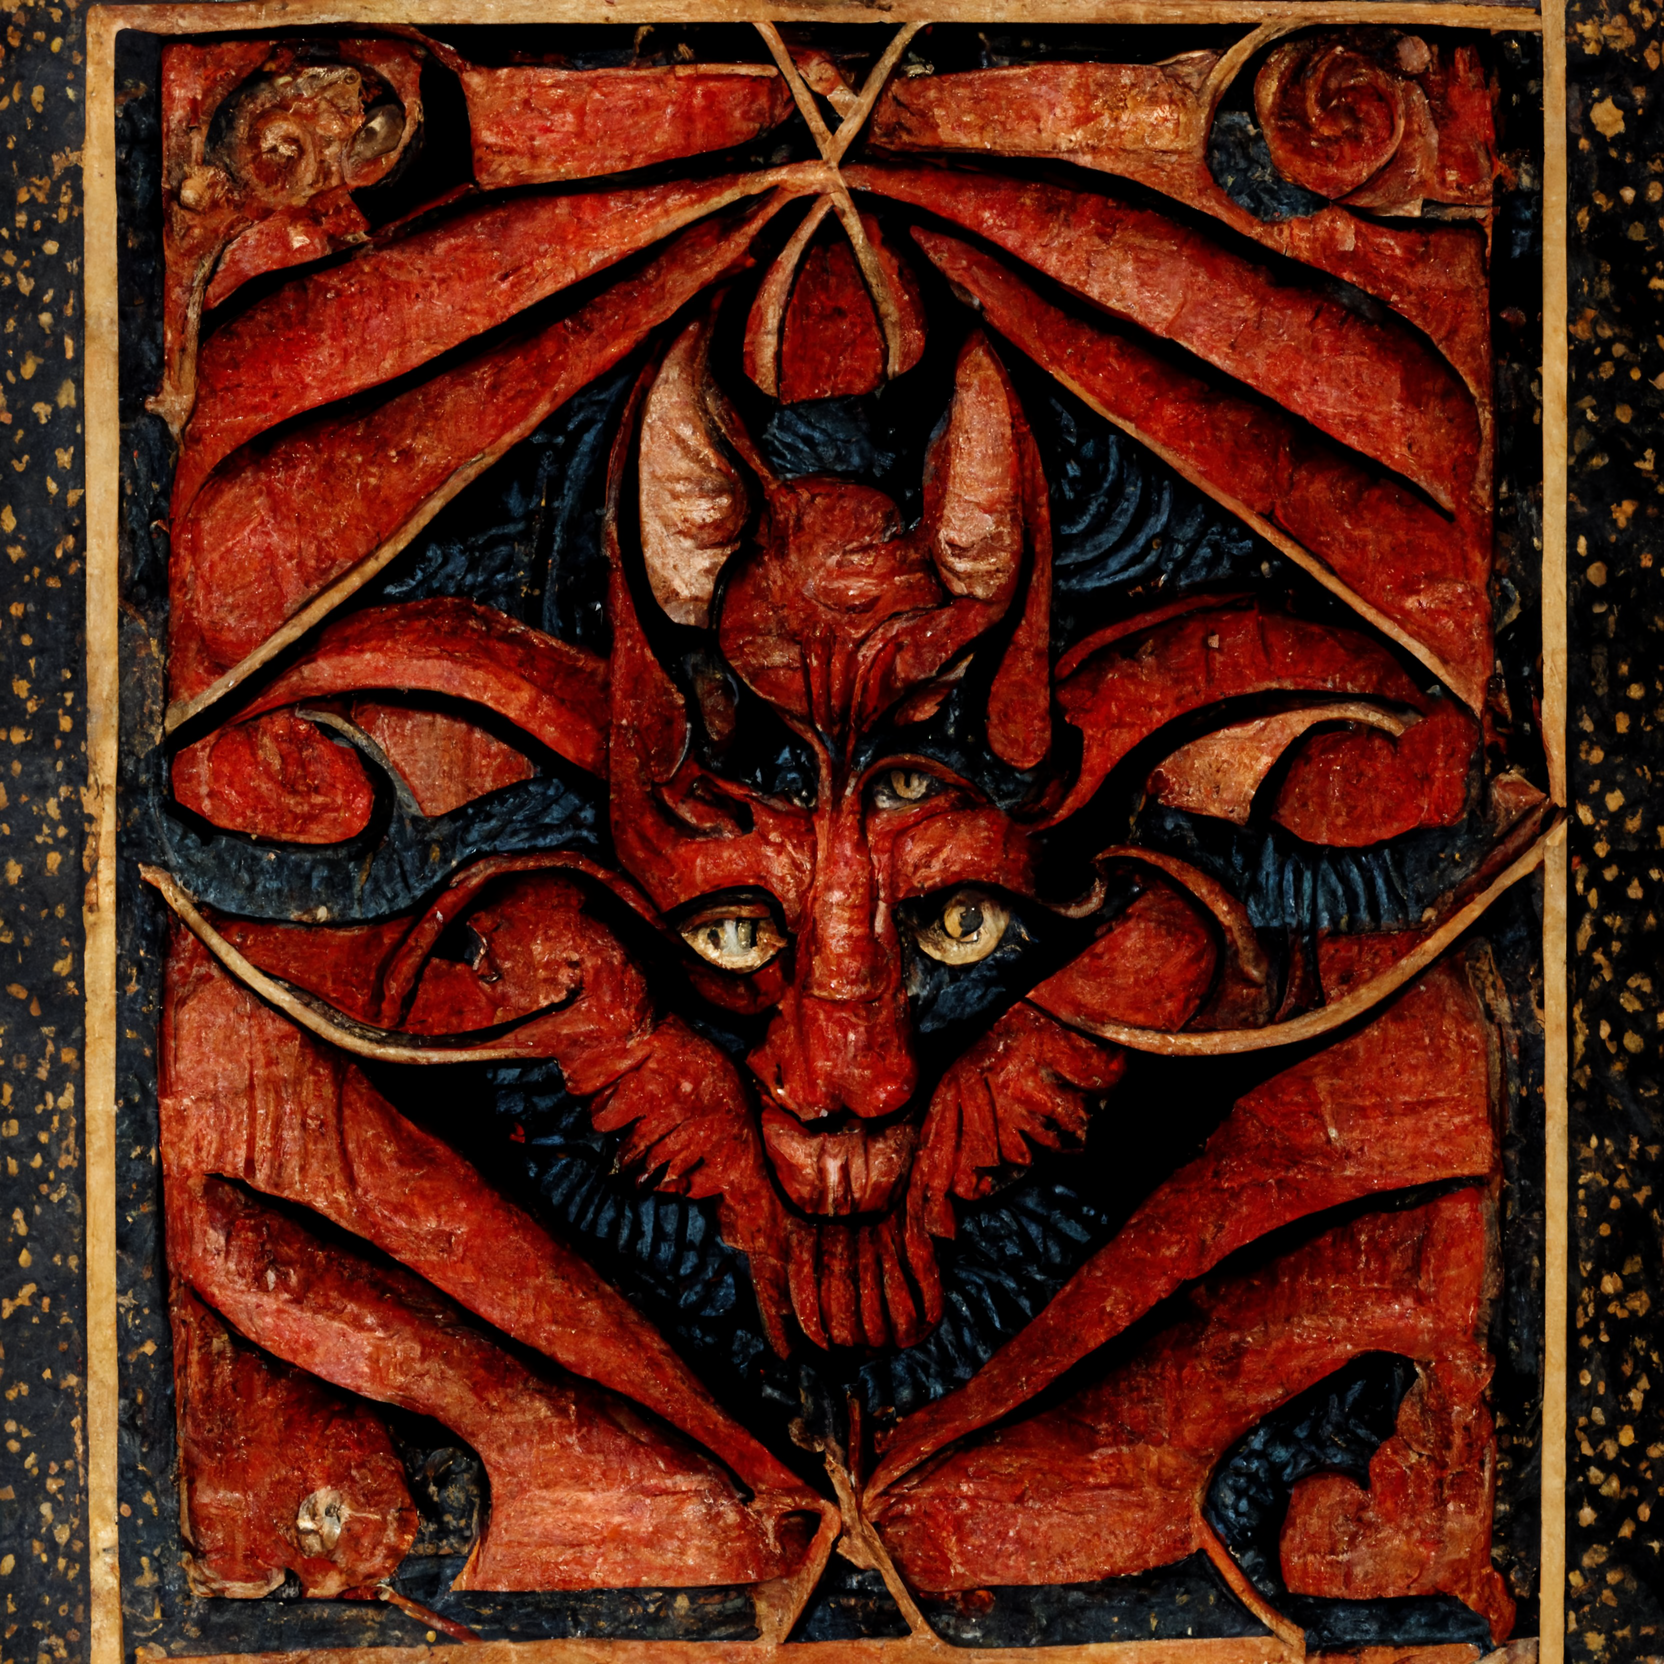 Ulysses_Black_devil_in_the_style_of_a_medieval_manuscript_ae9e6db3-0bad-45fe-bfb8-187d18d57f17.png